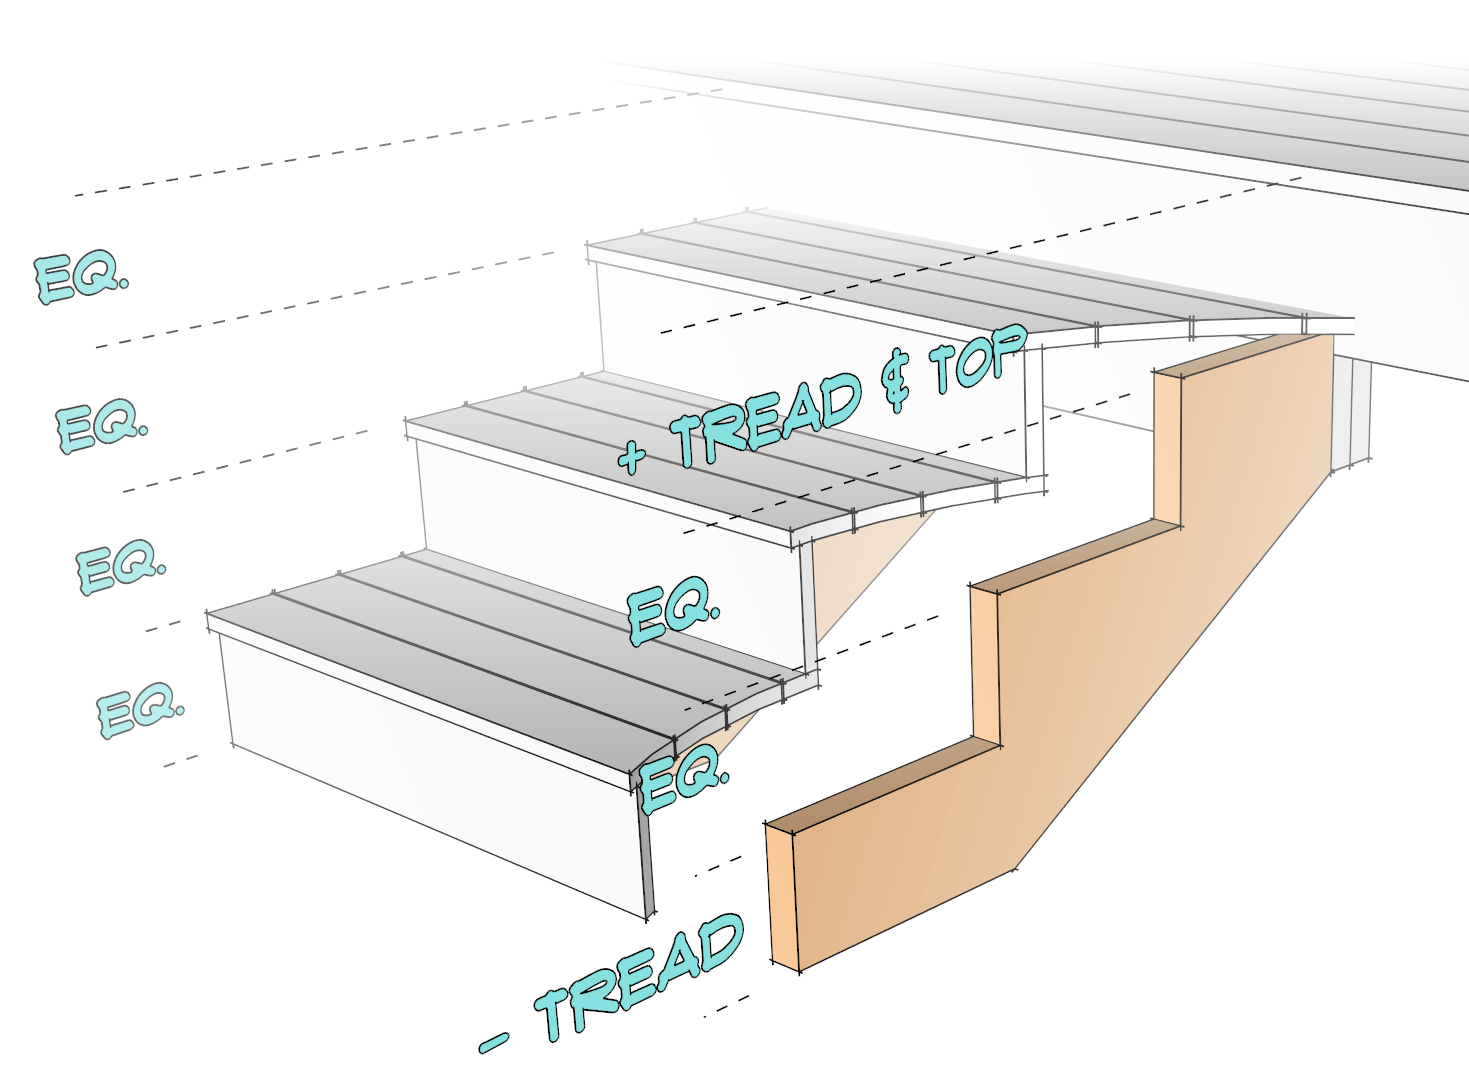 Calculating stair chain height